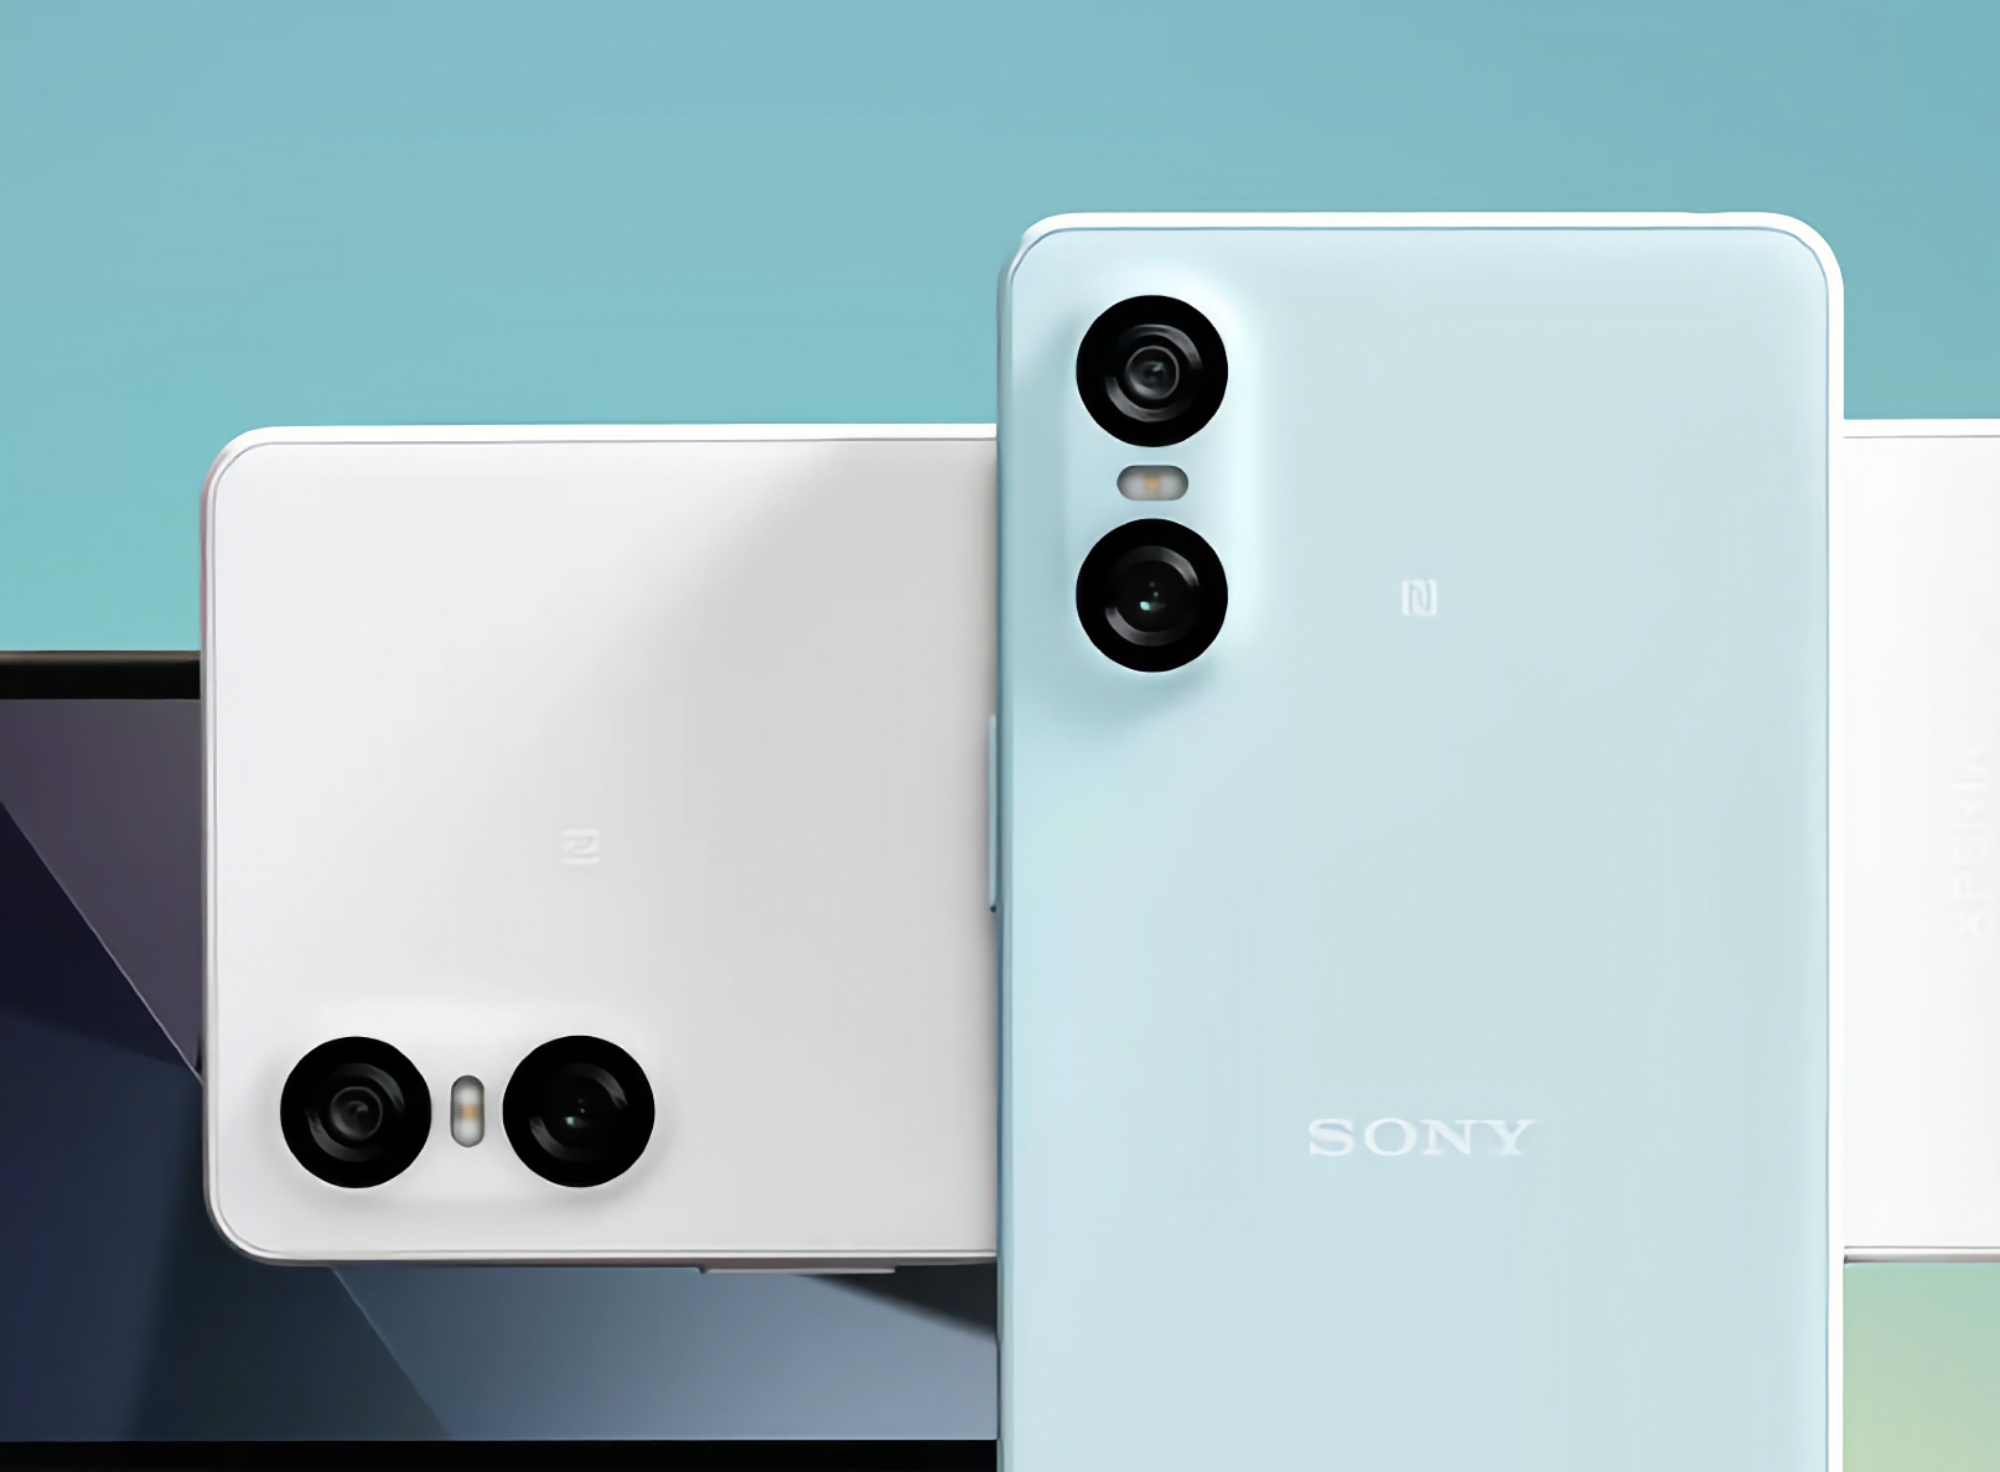 Sony Xperia 10 VI: OLED display, Snapdragon 6 Gen 1 chip, 48 MP camera and 5000 mAh battery with 30W charging for €399